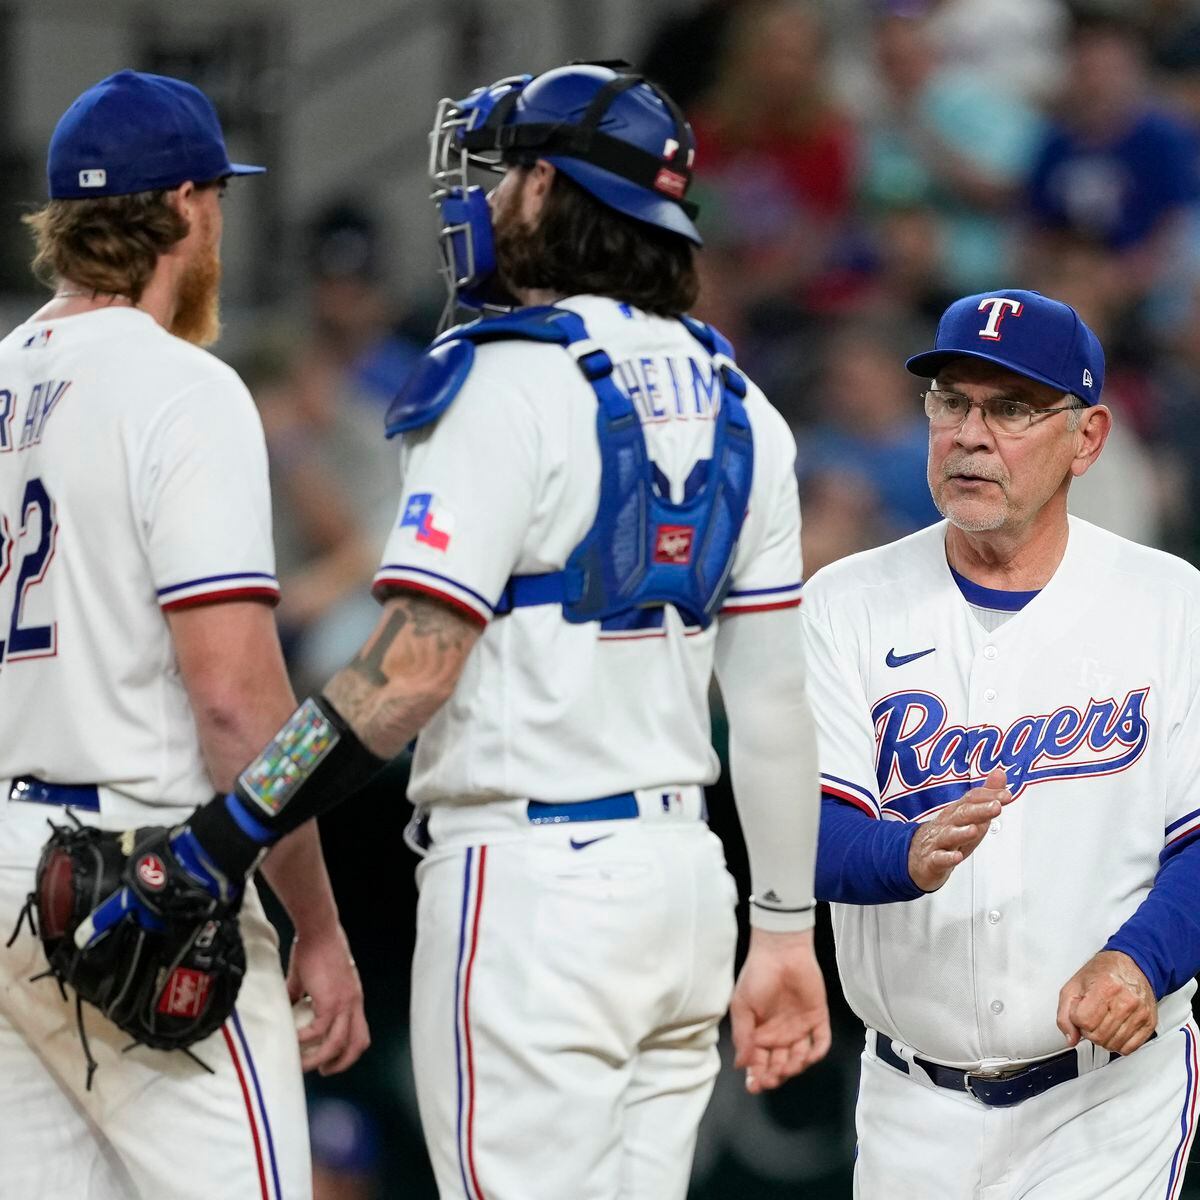 MLB on X: The Texas @Rangers: - Have won 11 of their last 15